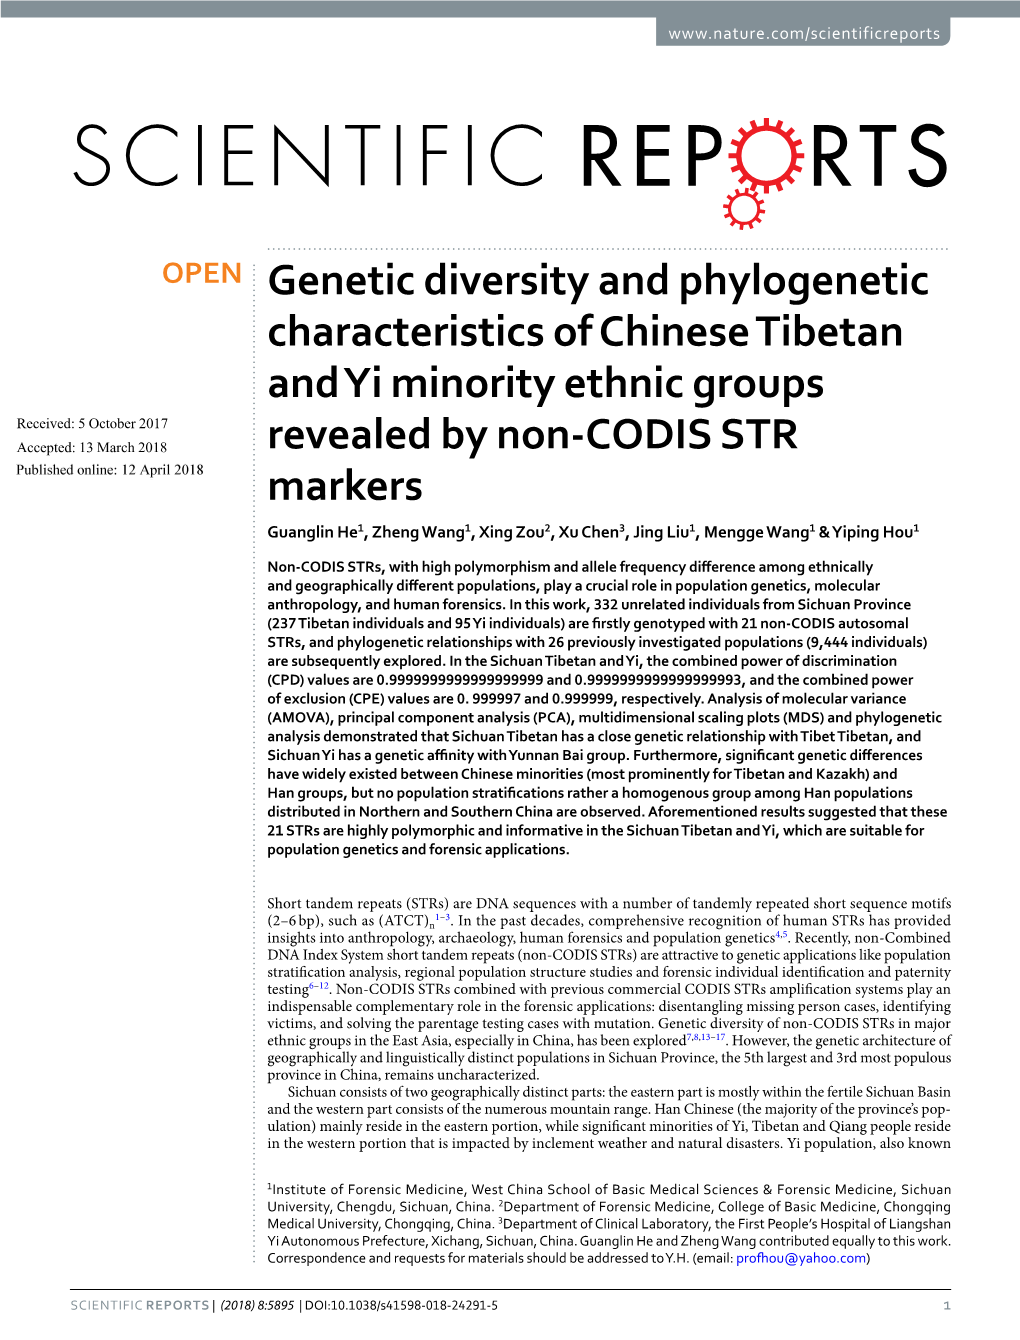 Genetic Diversity and Phylogenetic Characteristics of Chinese Tibetan